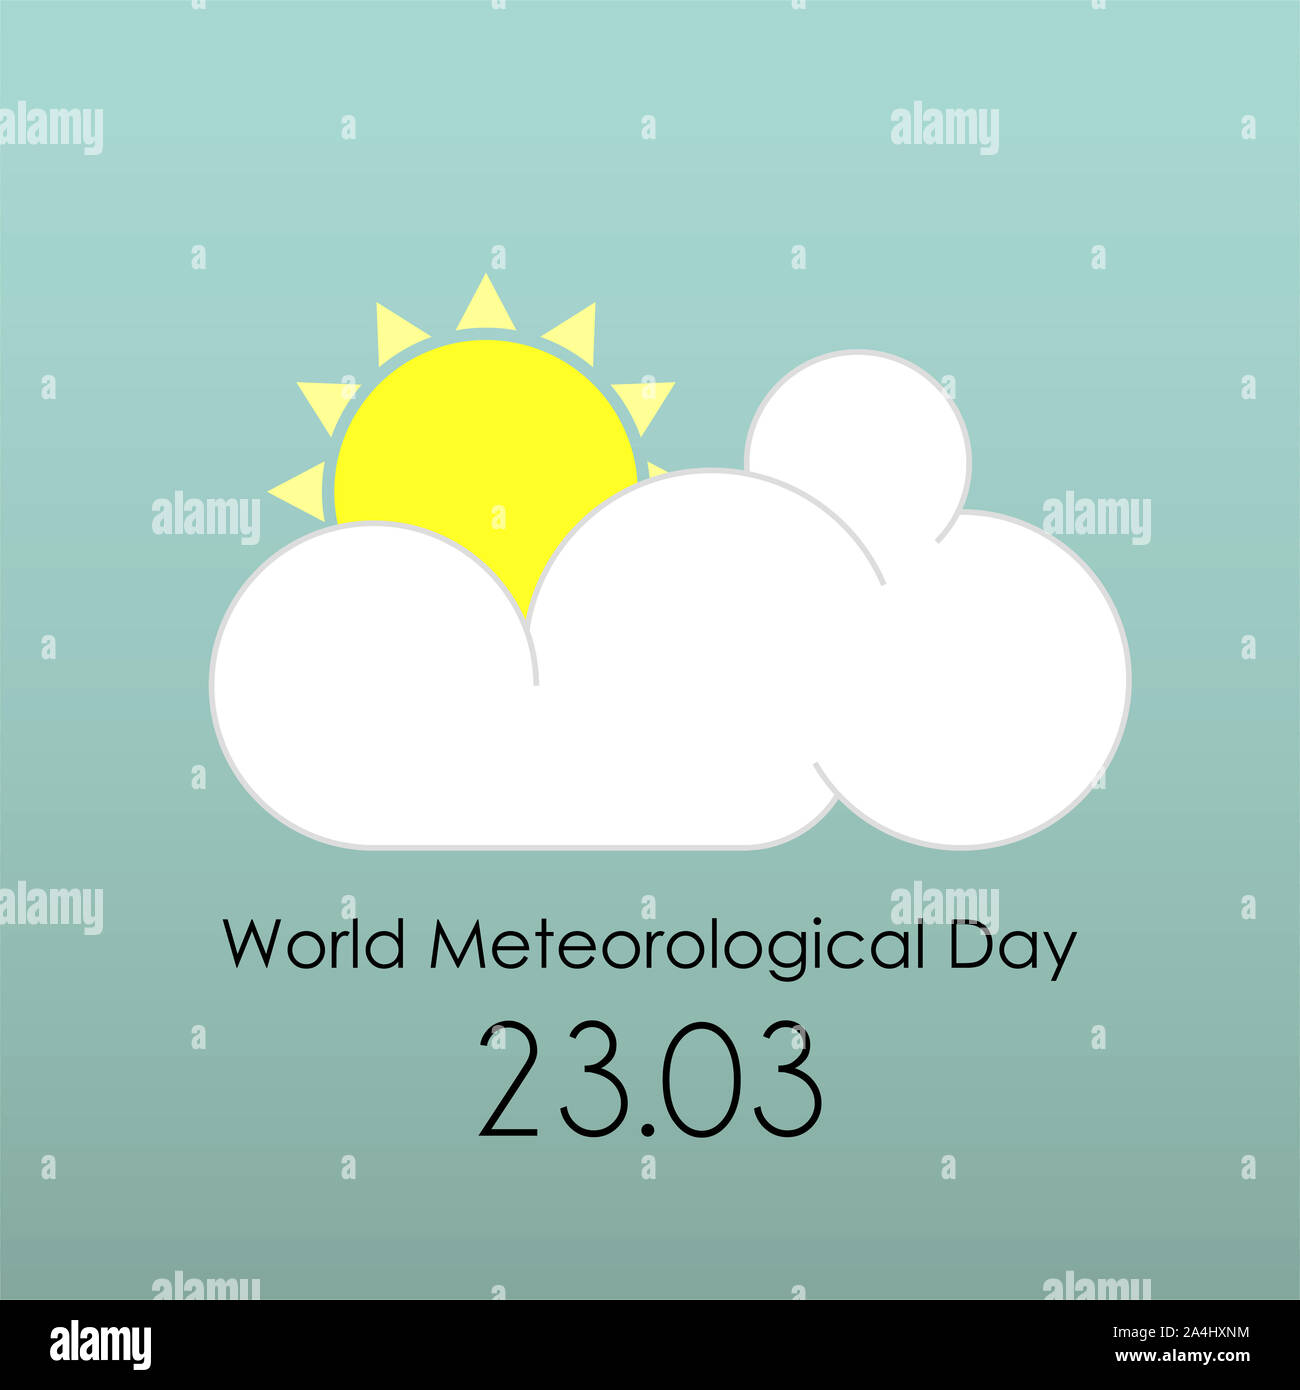 World Meteorological Day with overcast cloud icon Stock Photo